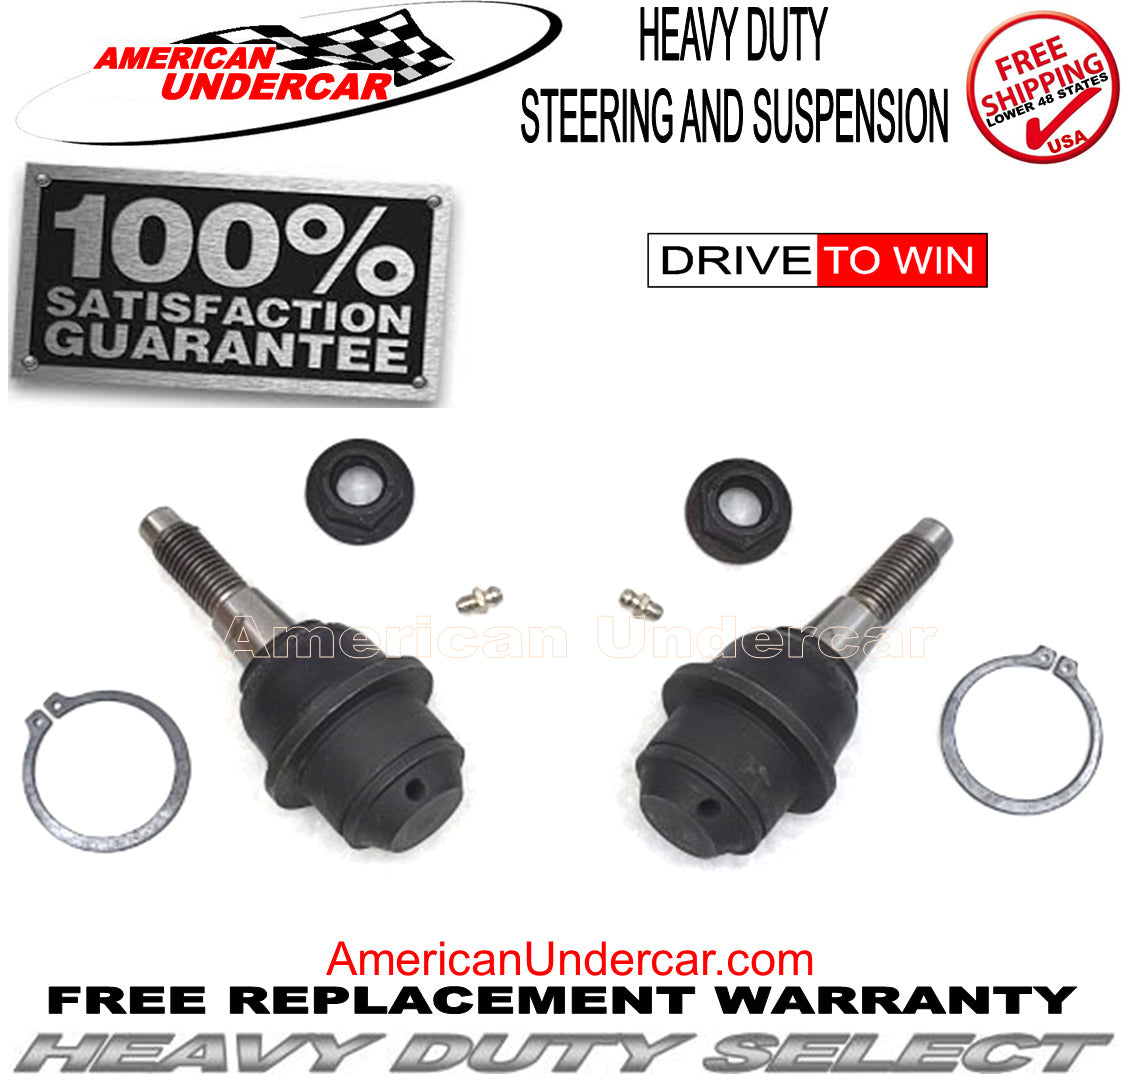 Cadillac Chevrolet GMC 2007 - 2013 HD Lower Ball Joints Suspension Kit K500007